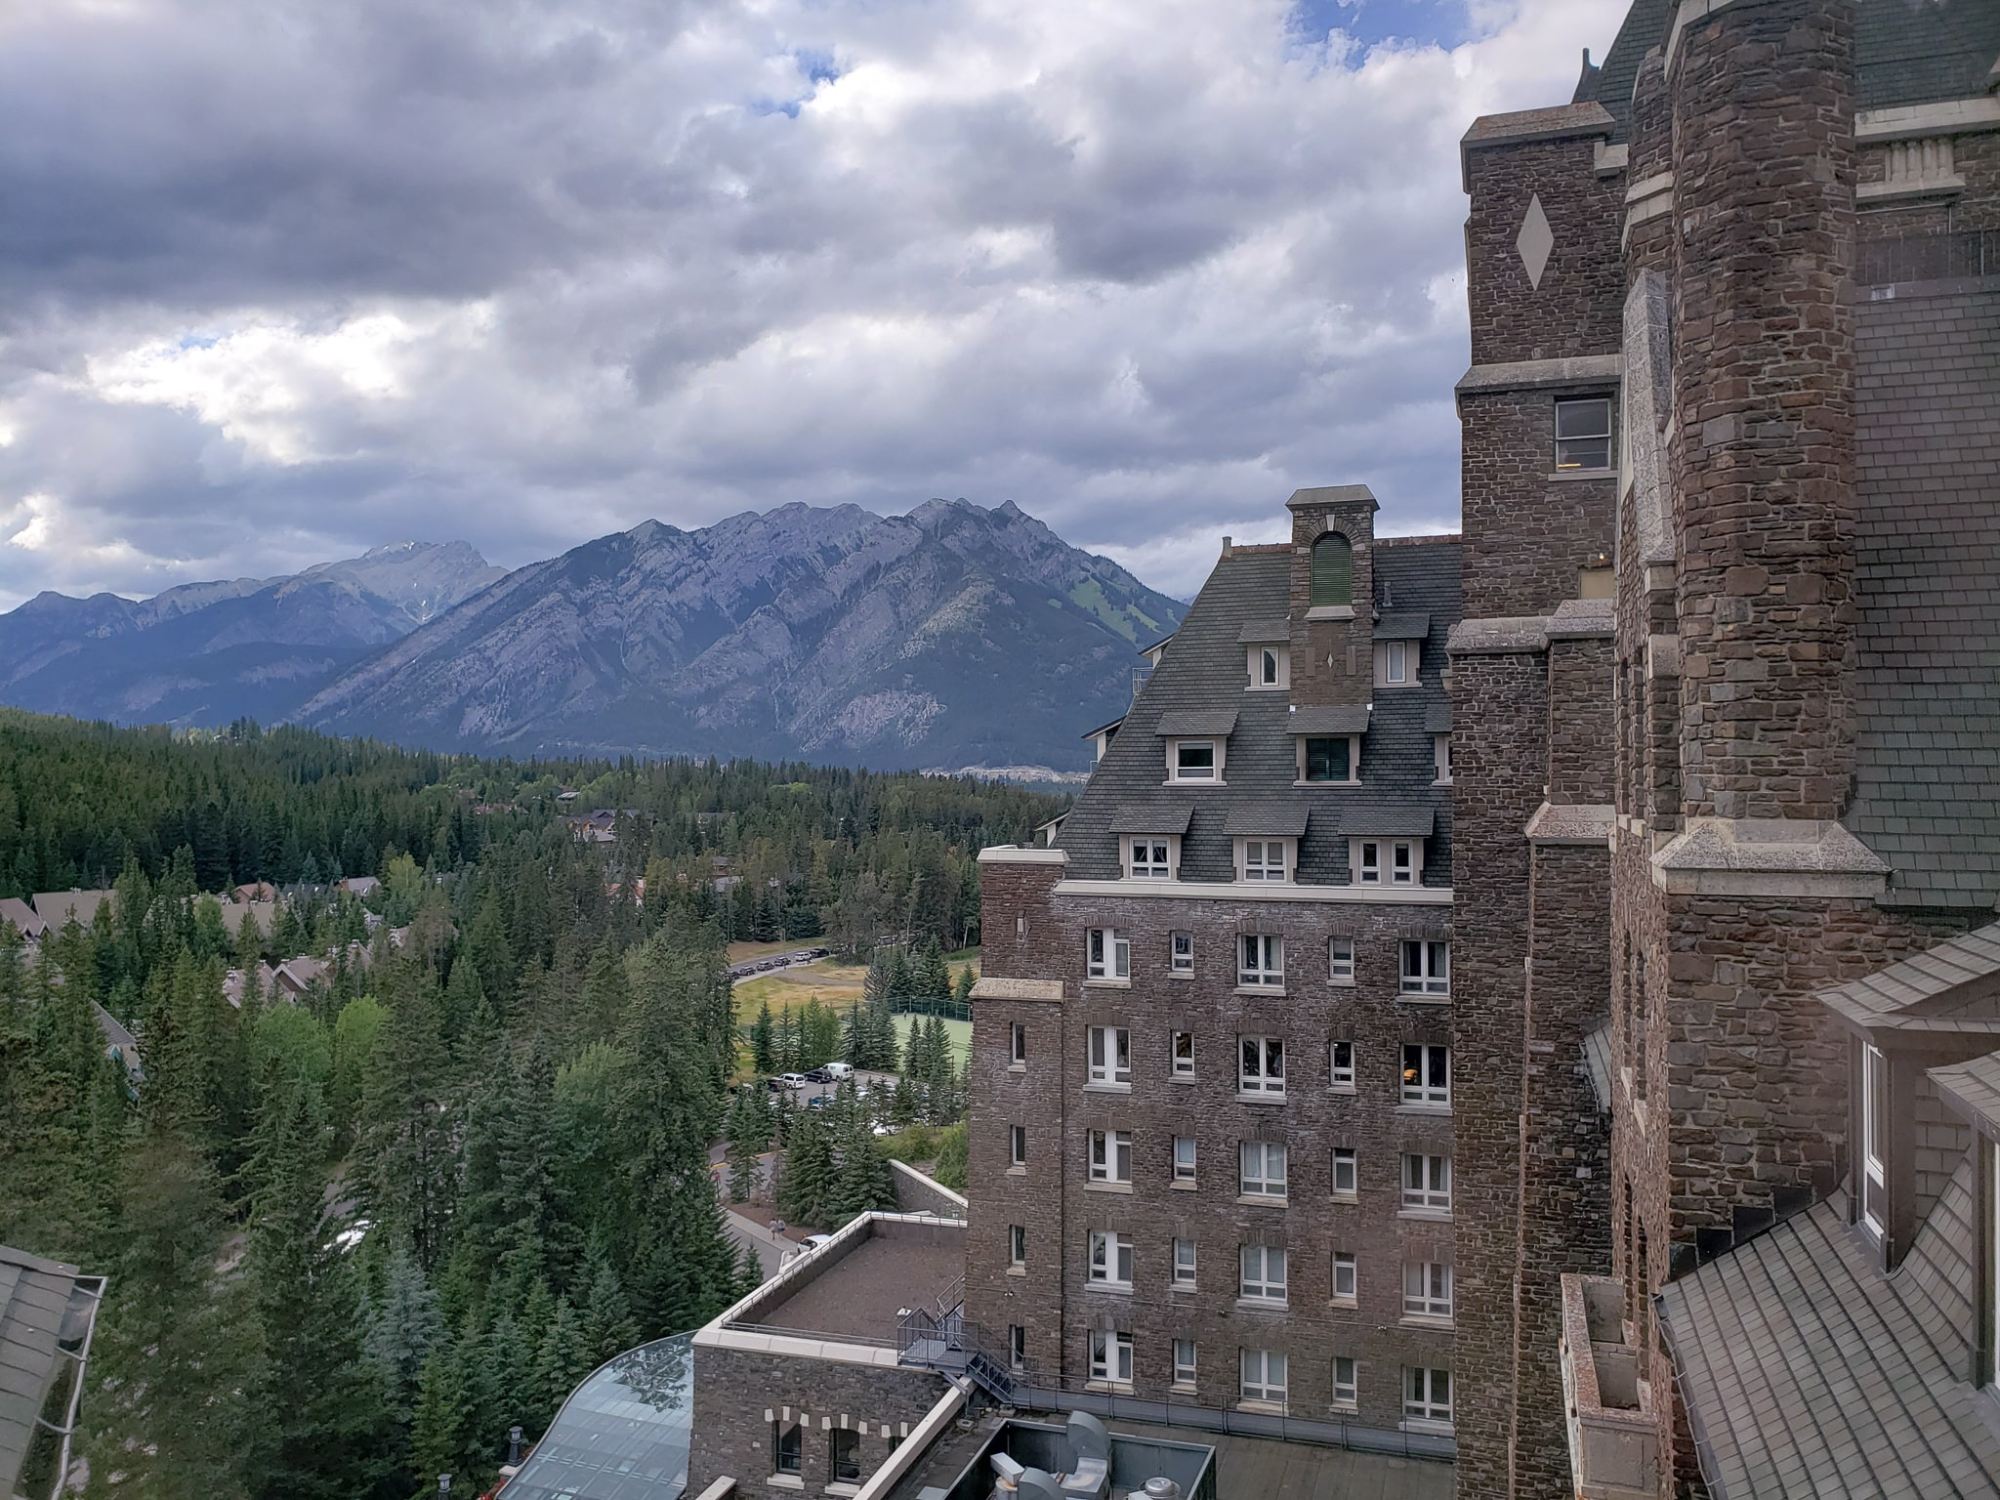 View from a room of the Fairmont Banff Springs